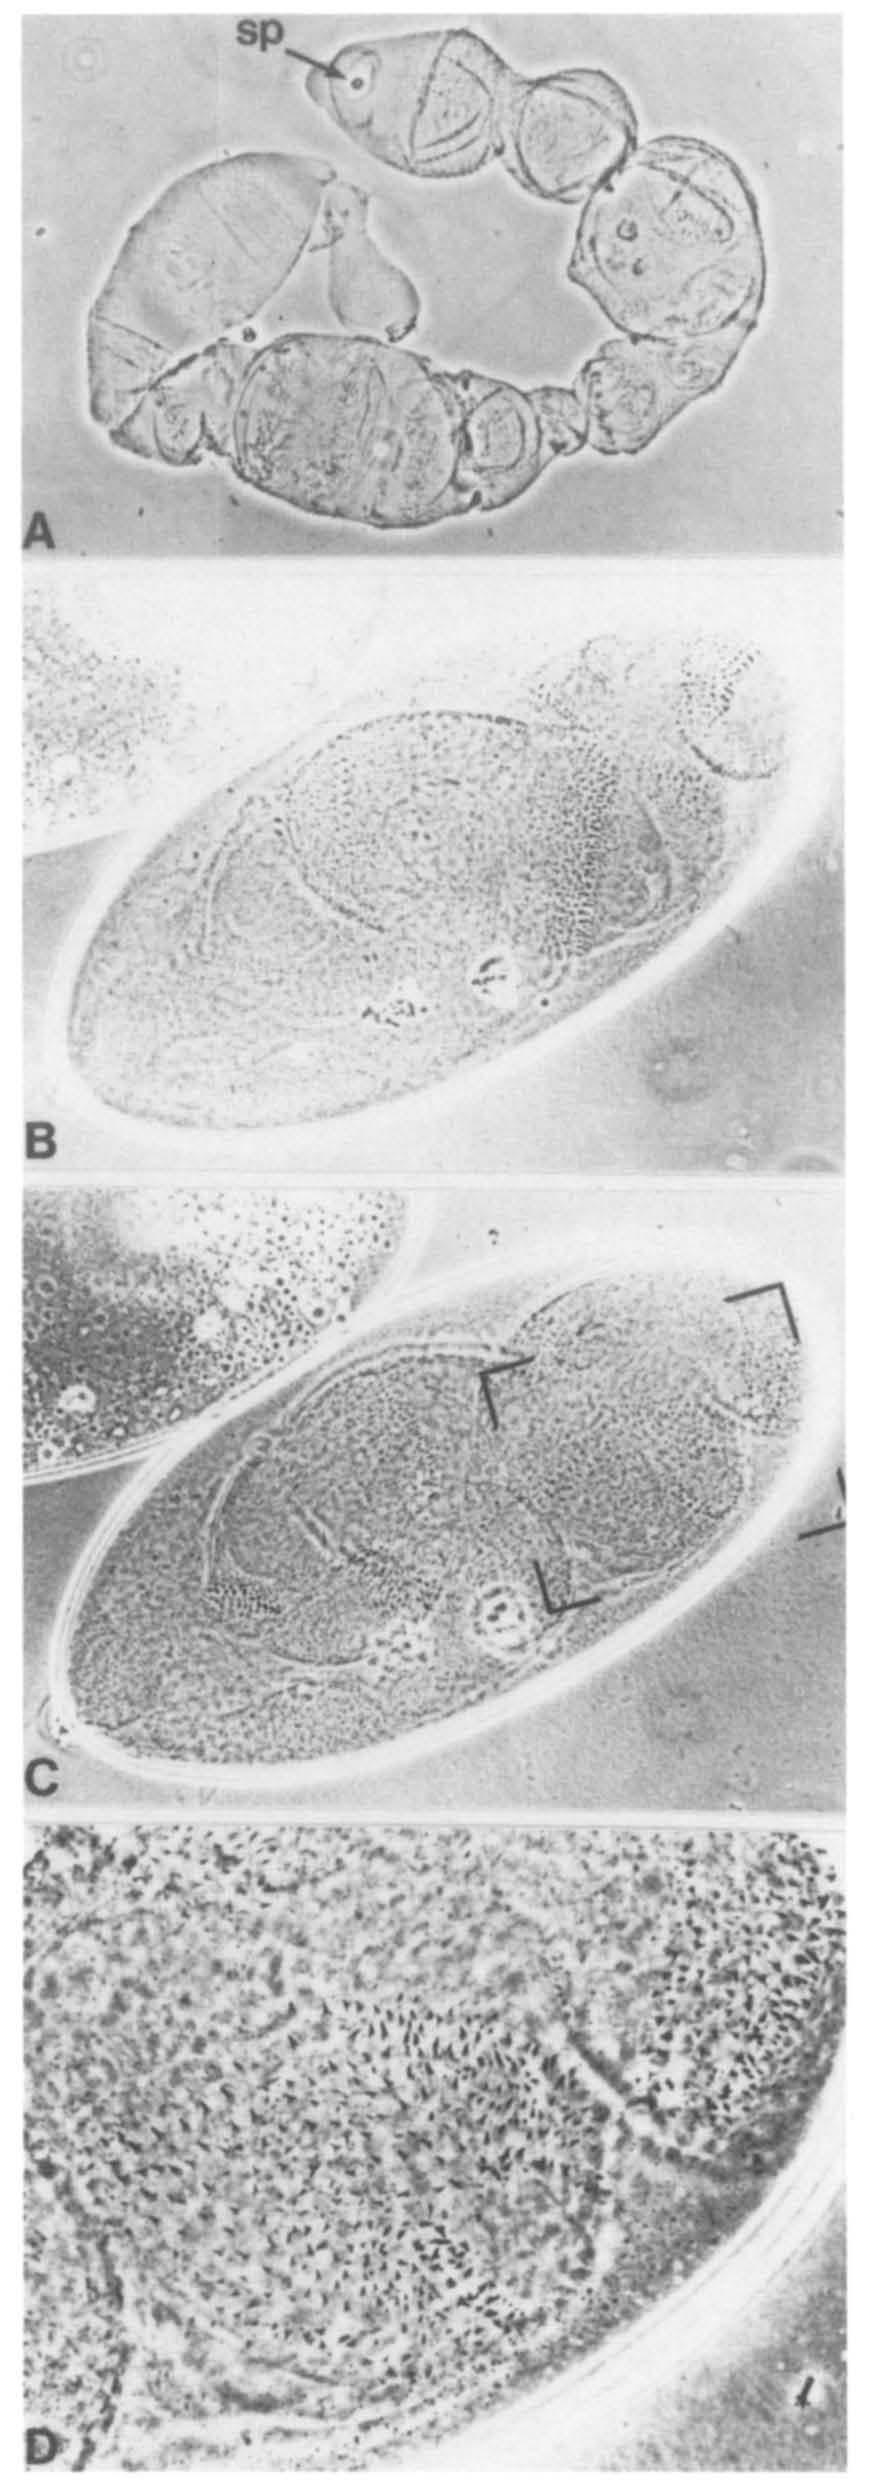 Dorso--ventral patterning Figure 6. Examples of dpp Hi~ + and dpp Hin- embryos derived from homozygous dl 1 mothers. Phase contrast views of embryos derived from dl ~ homozygous mothers.